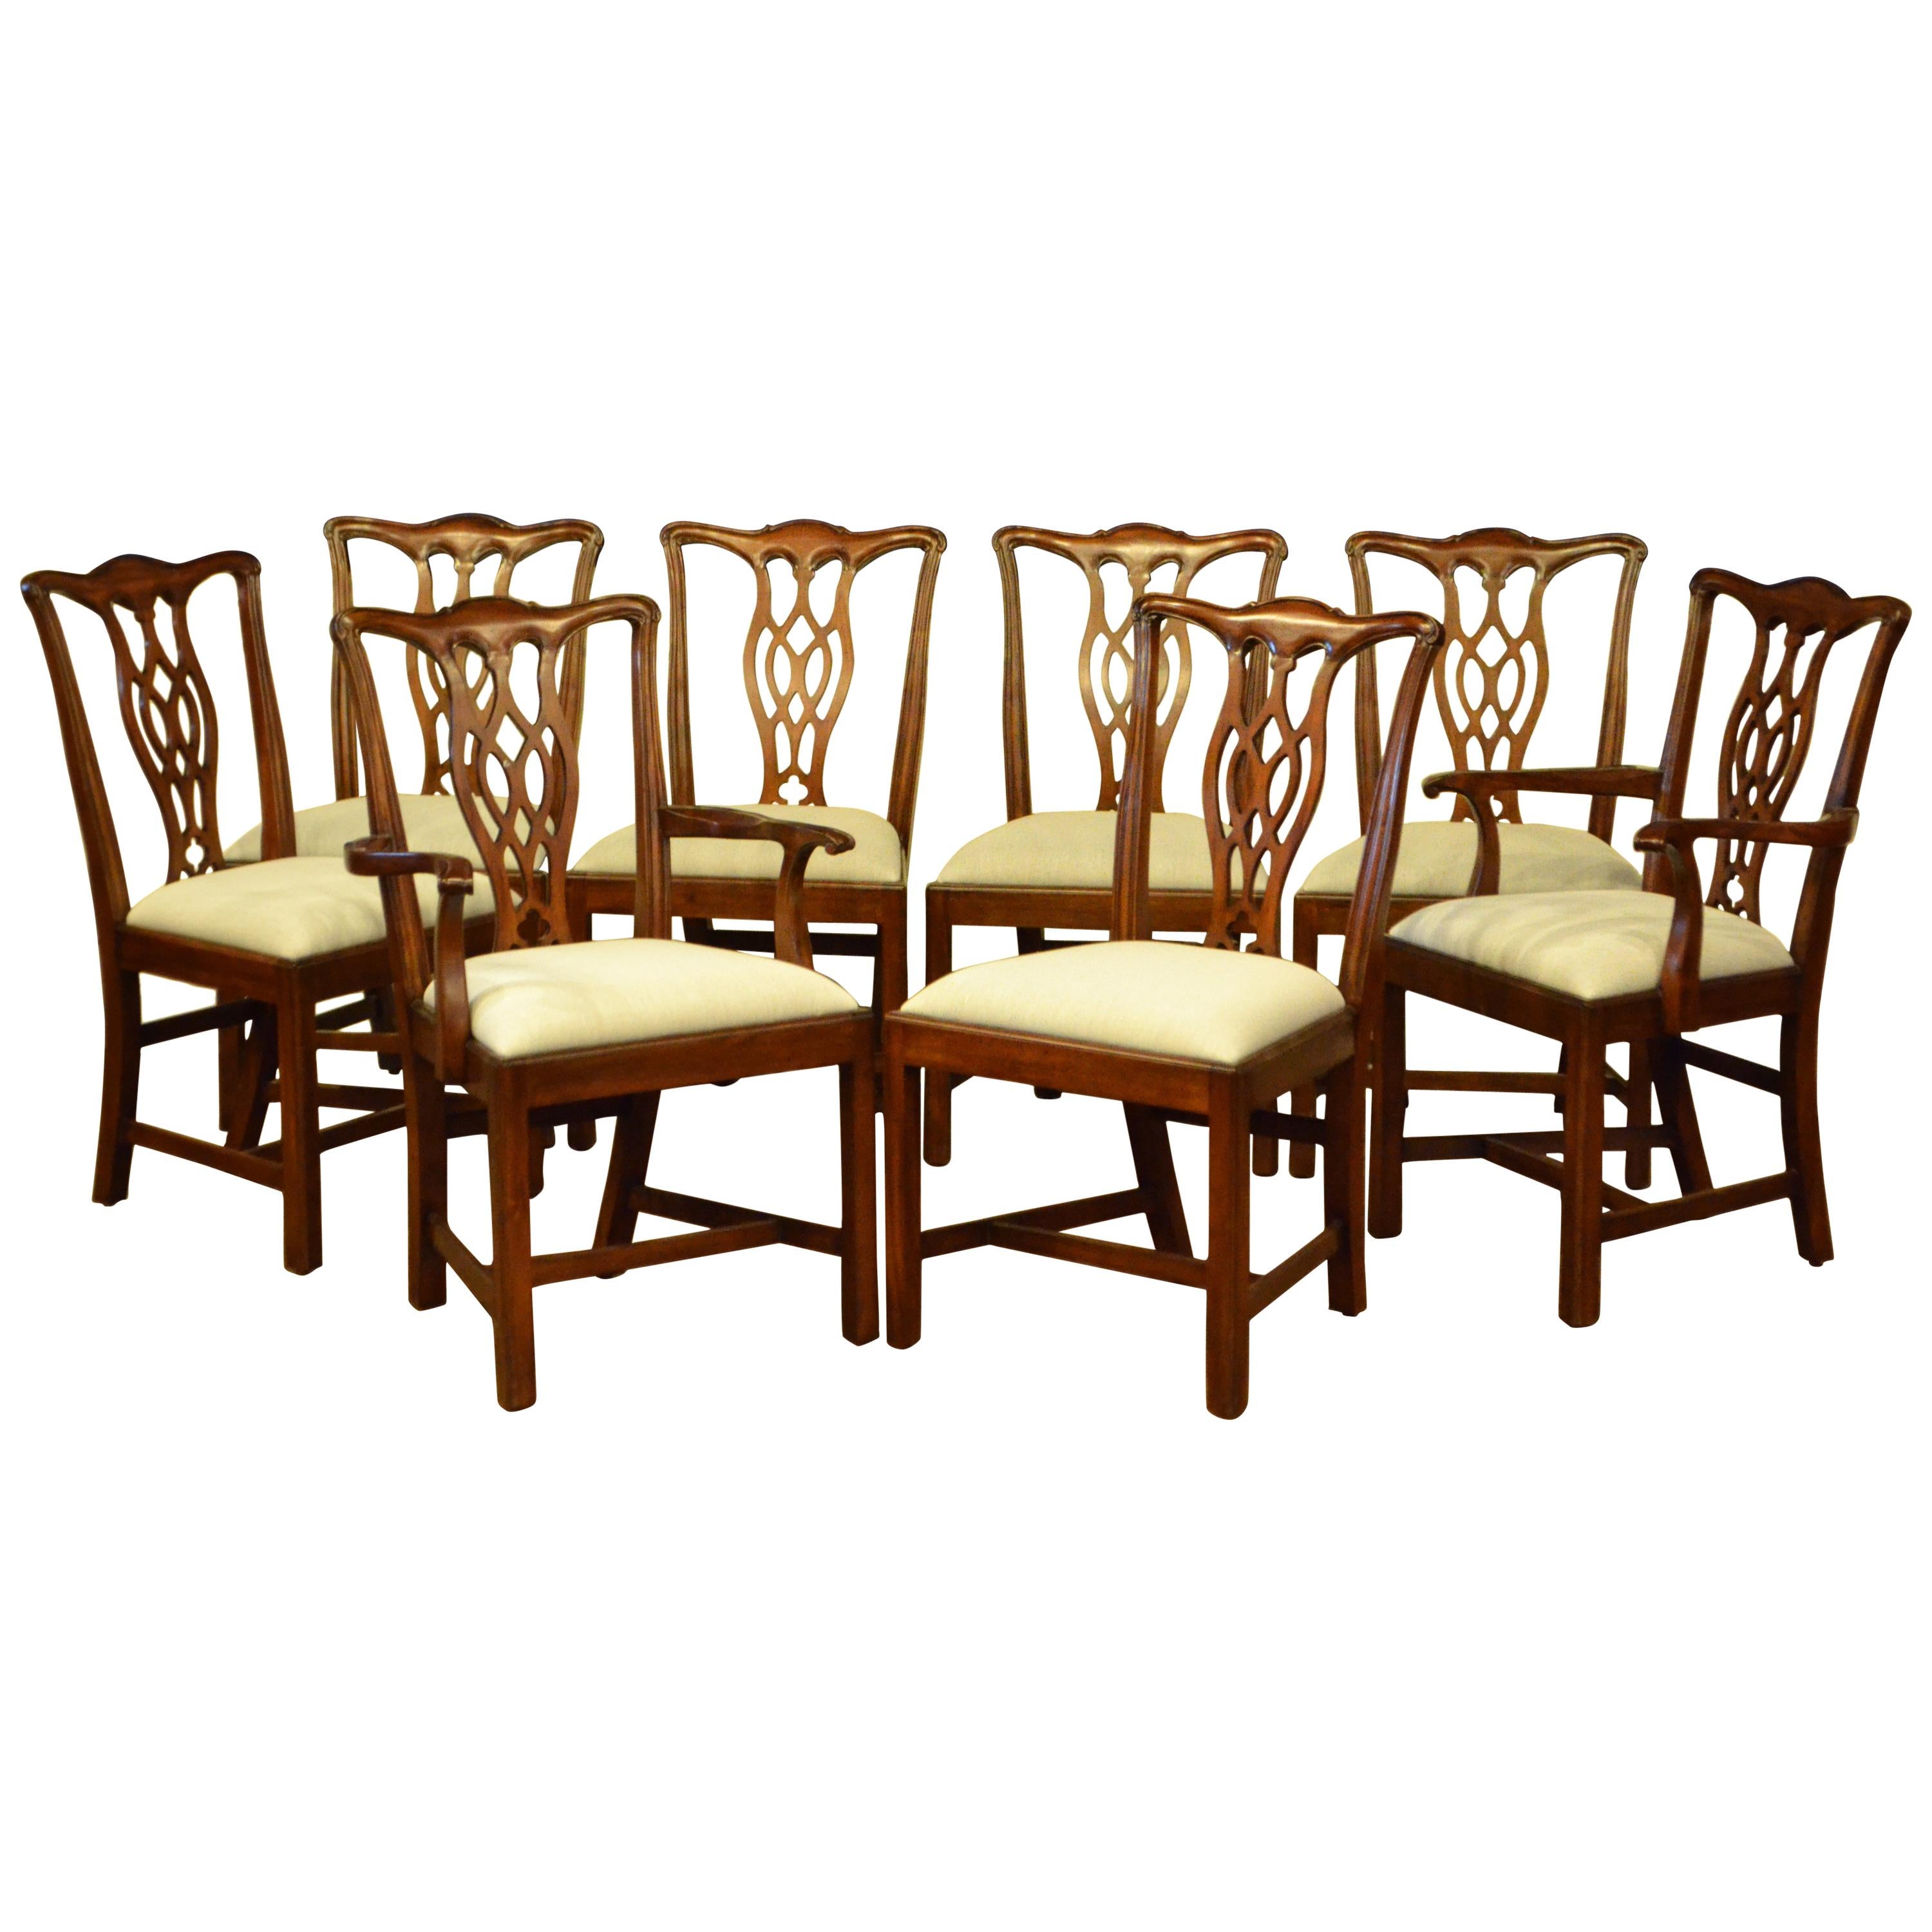 Four New Mahogany Straight Leg Chippendale Style Dining Chairs by Leighton Hall